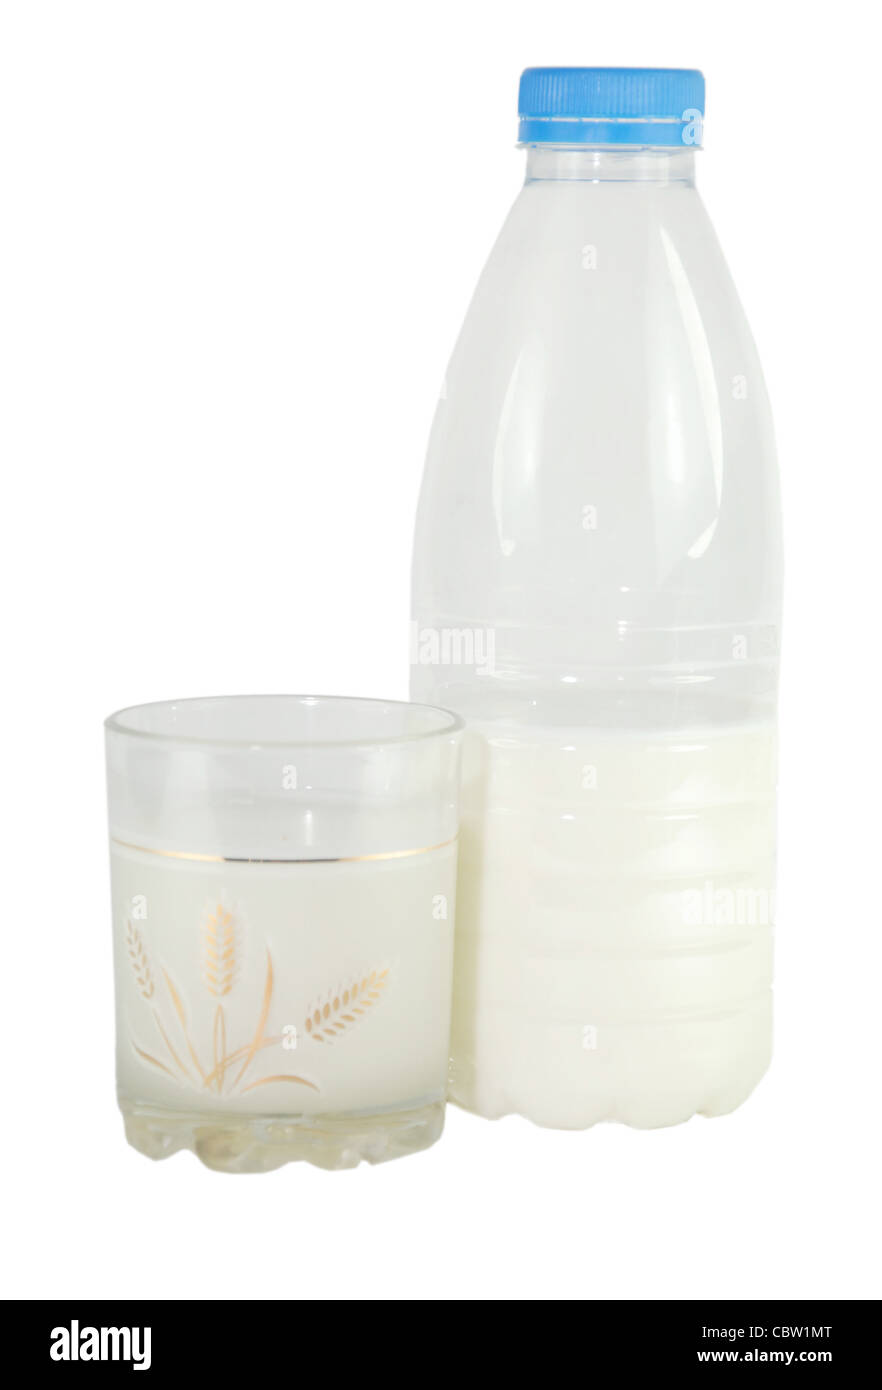 glass, a bottle of hearty, useful milk on a black background Stock Photo